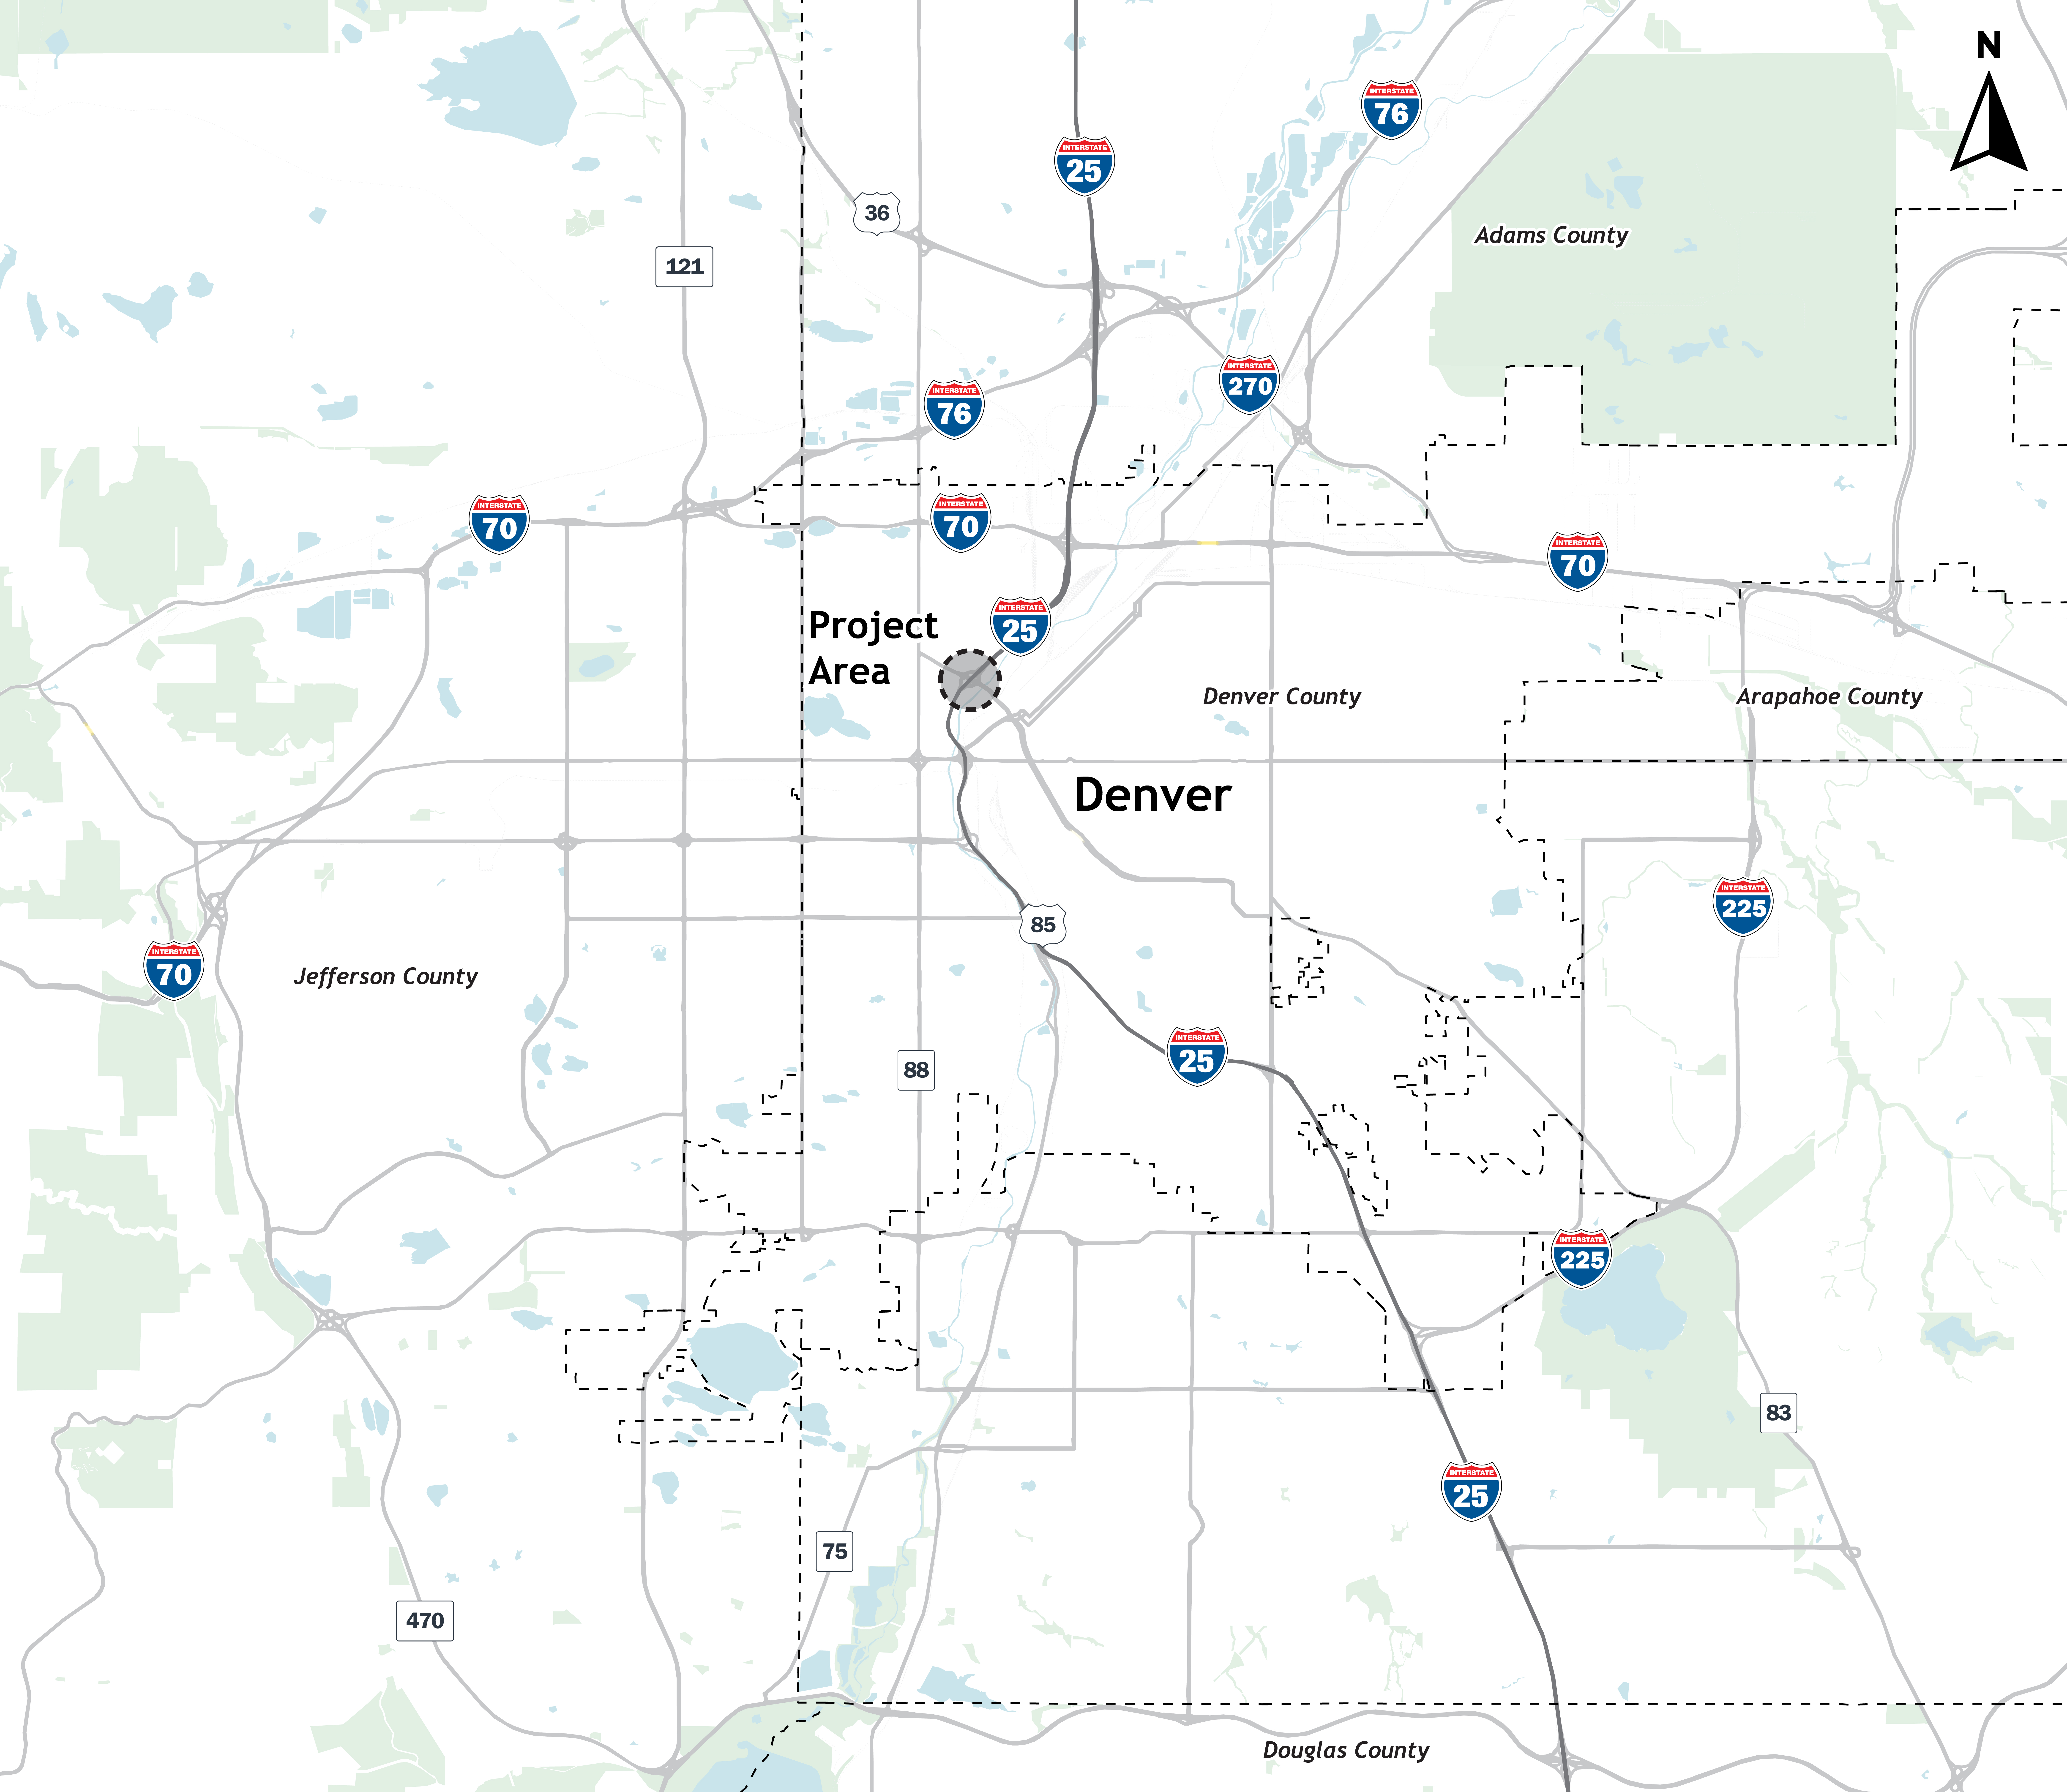 Denver Metro Area map with project area on I-25 near central Denver.jpg detail image